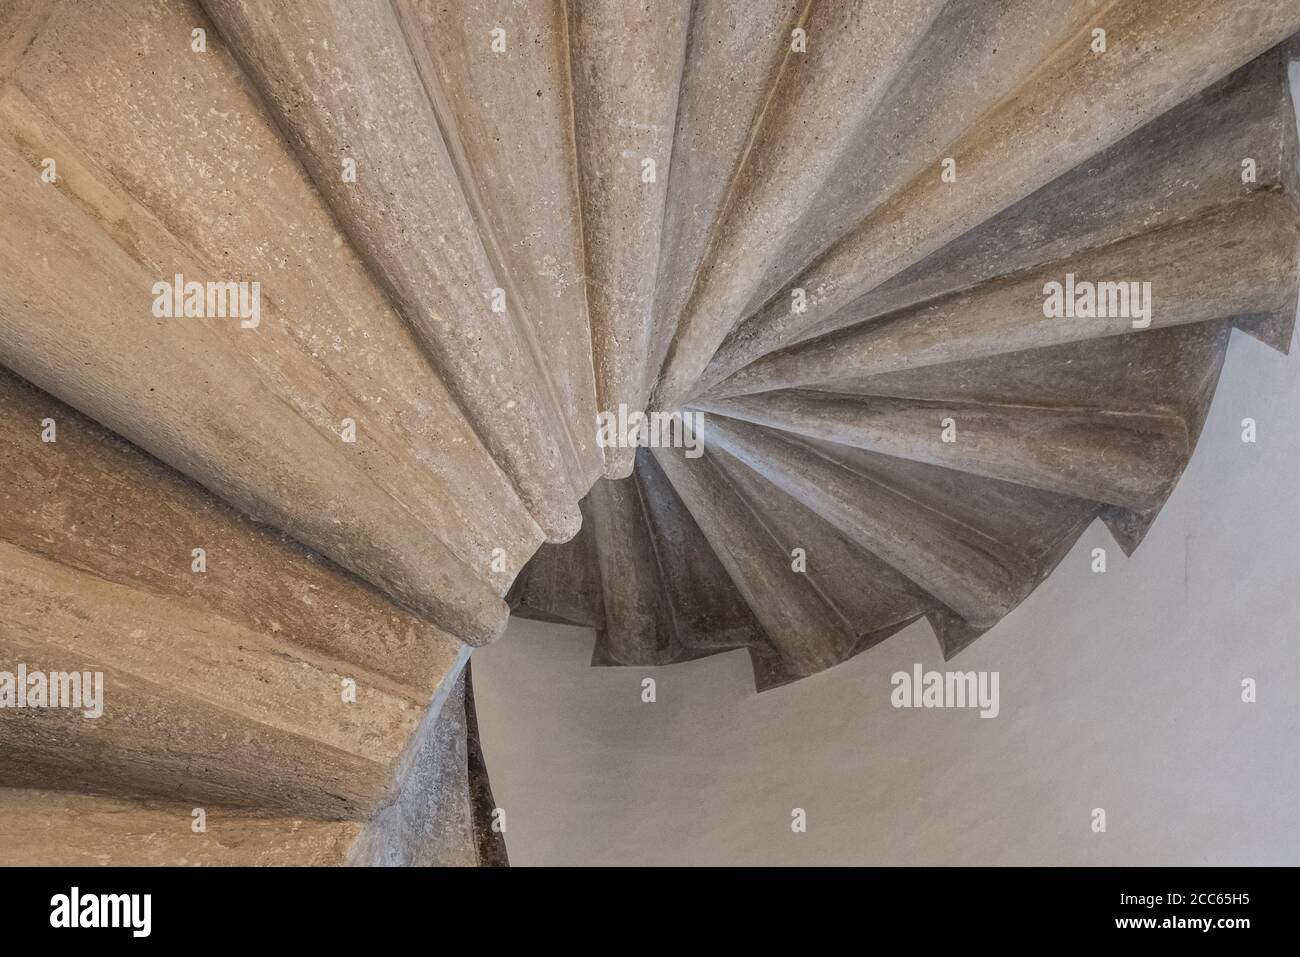 Graz, Austria. August 2020.  detail of the double helical spiral staircase built in 1499 located in the inner courtyard of the palaces of the former i Stock Photo